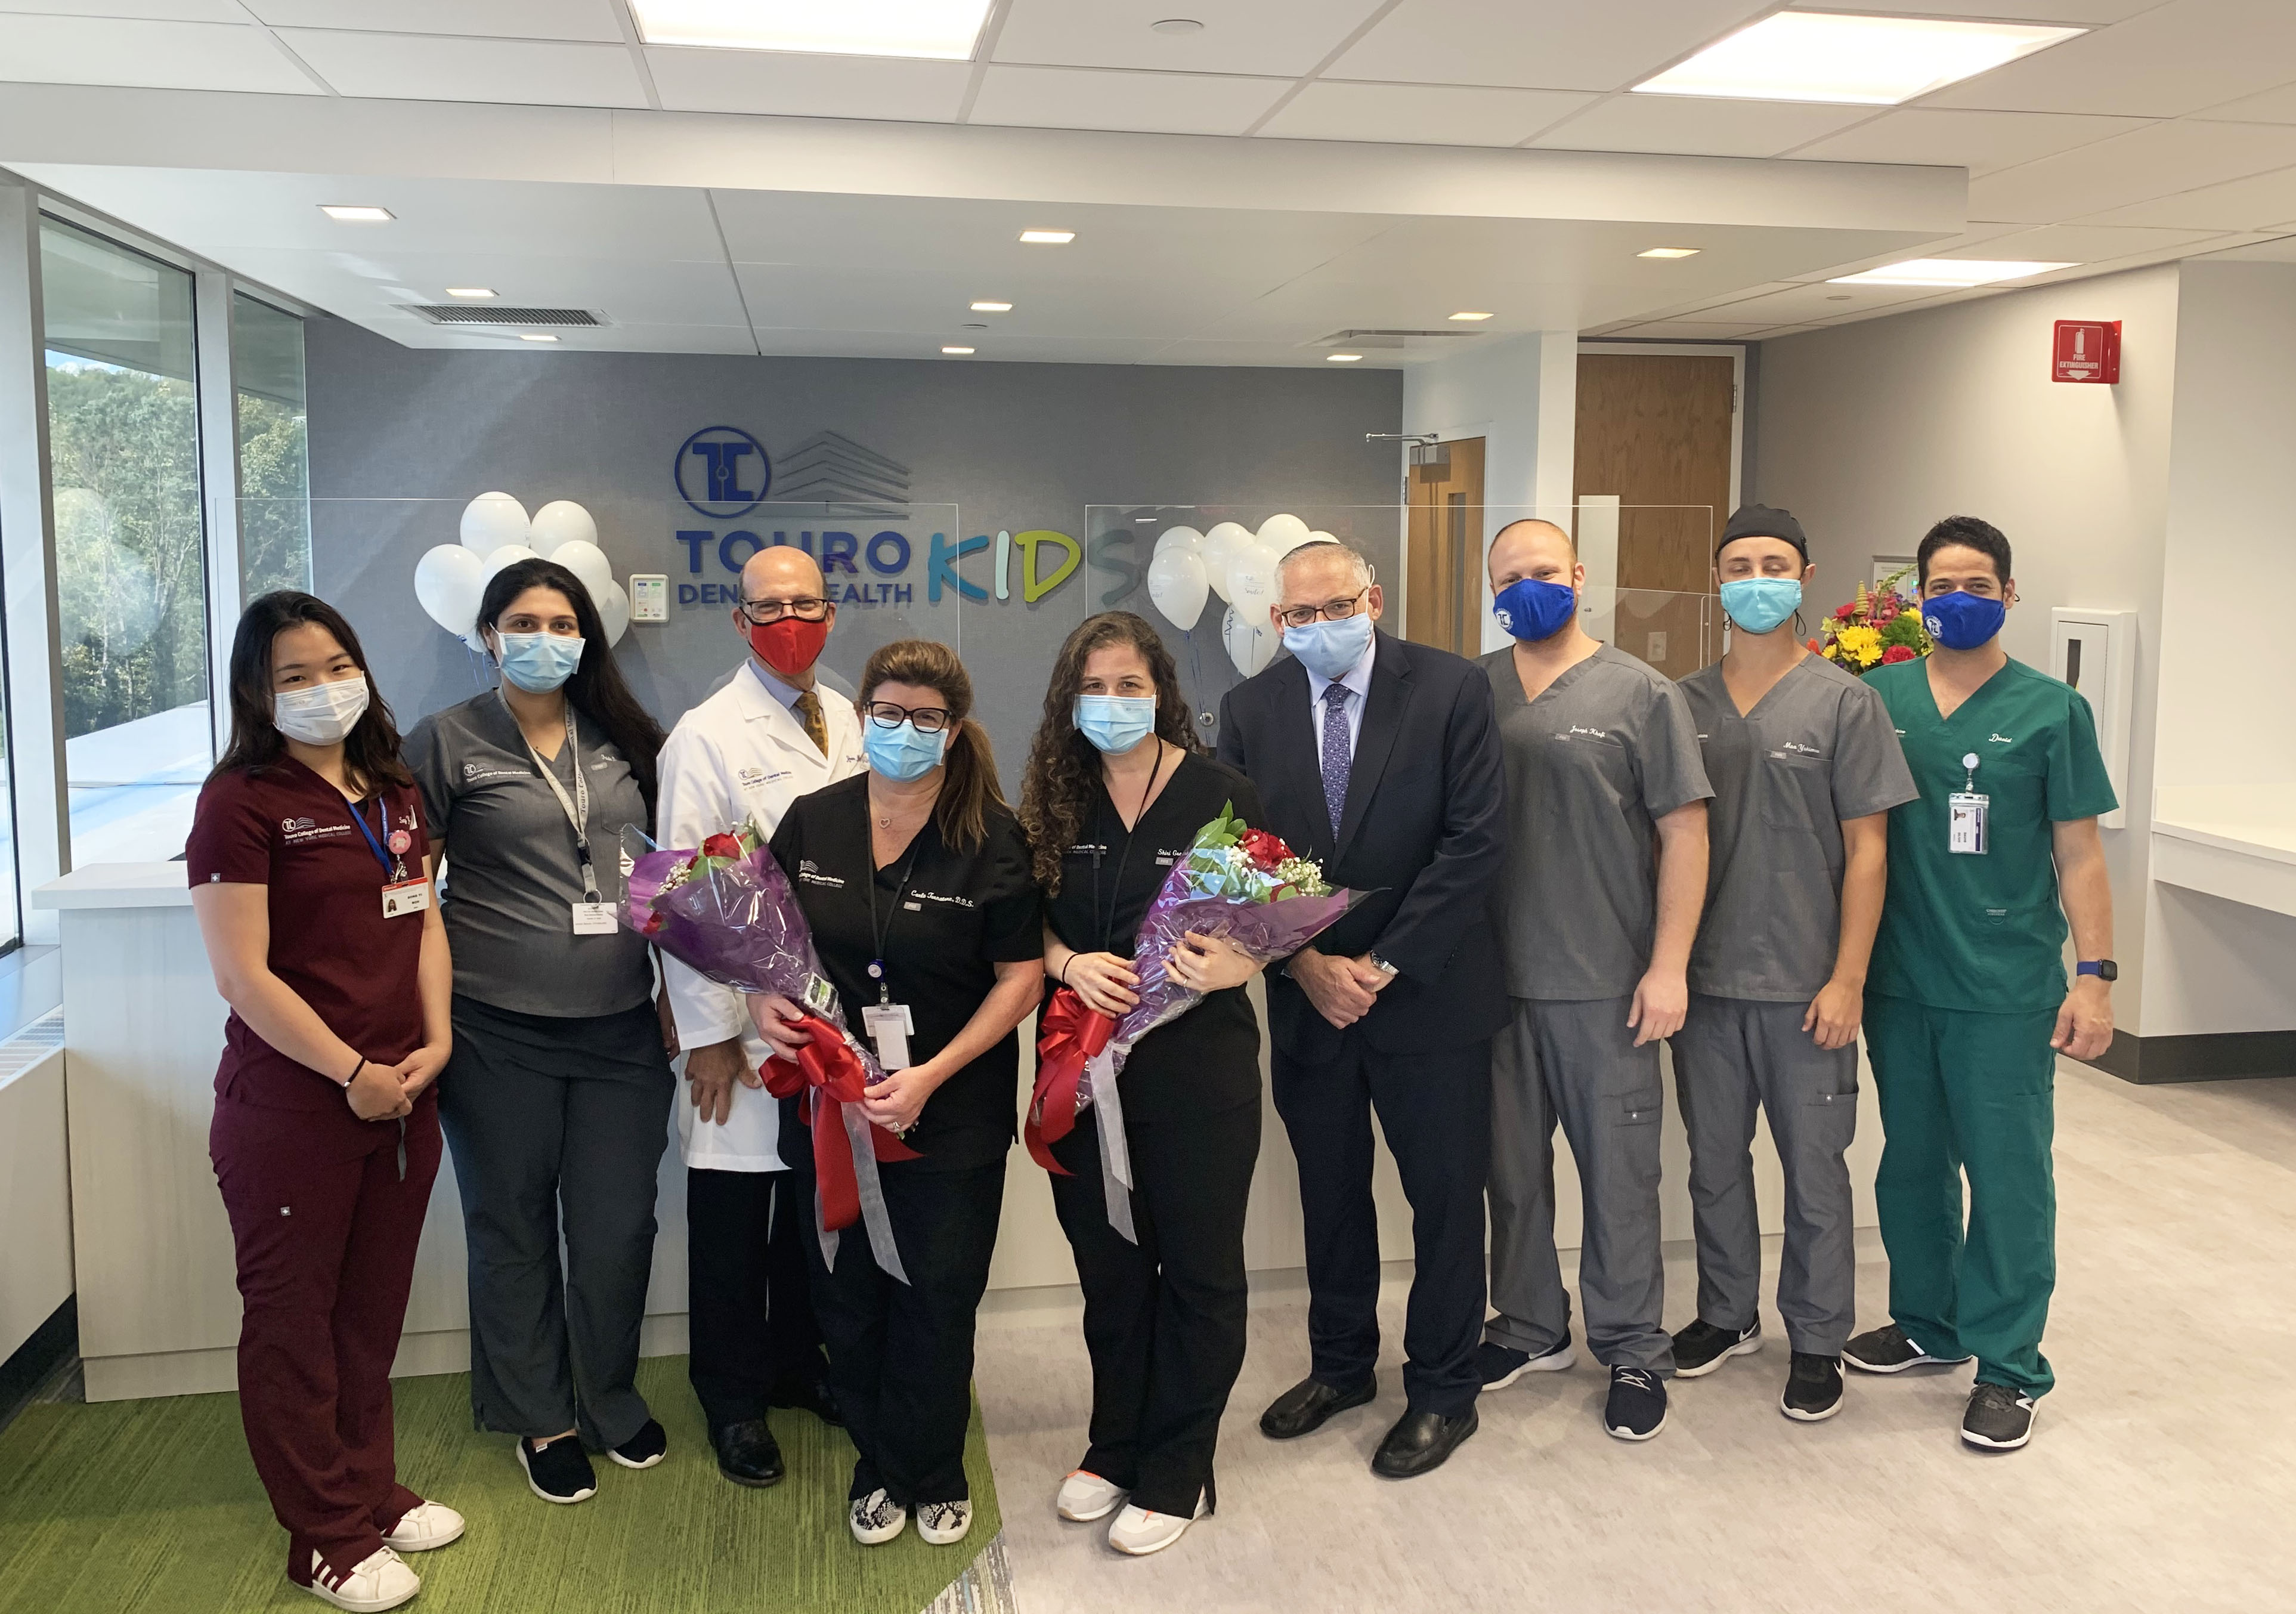 Touro Dental Health Expands to Include New Cutting-Edge Pediatric Dental Practice | Touro College of Dental Medicine